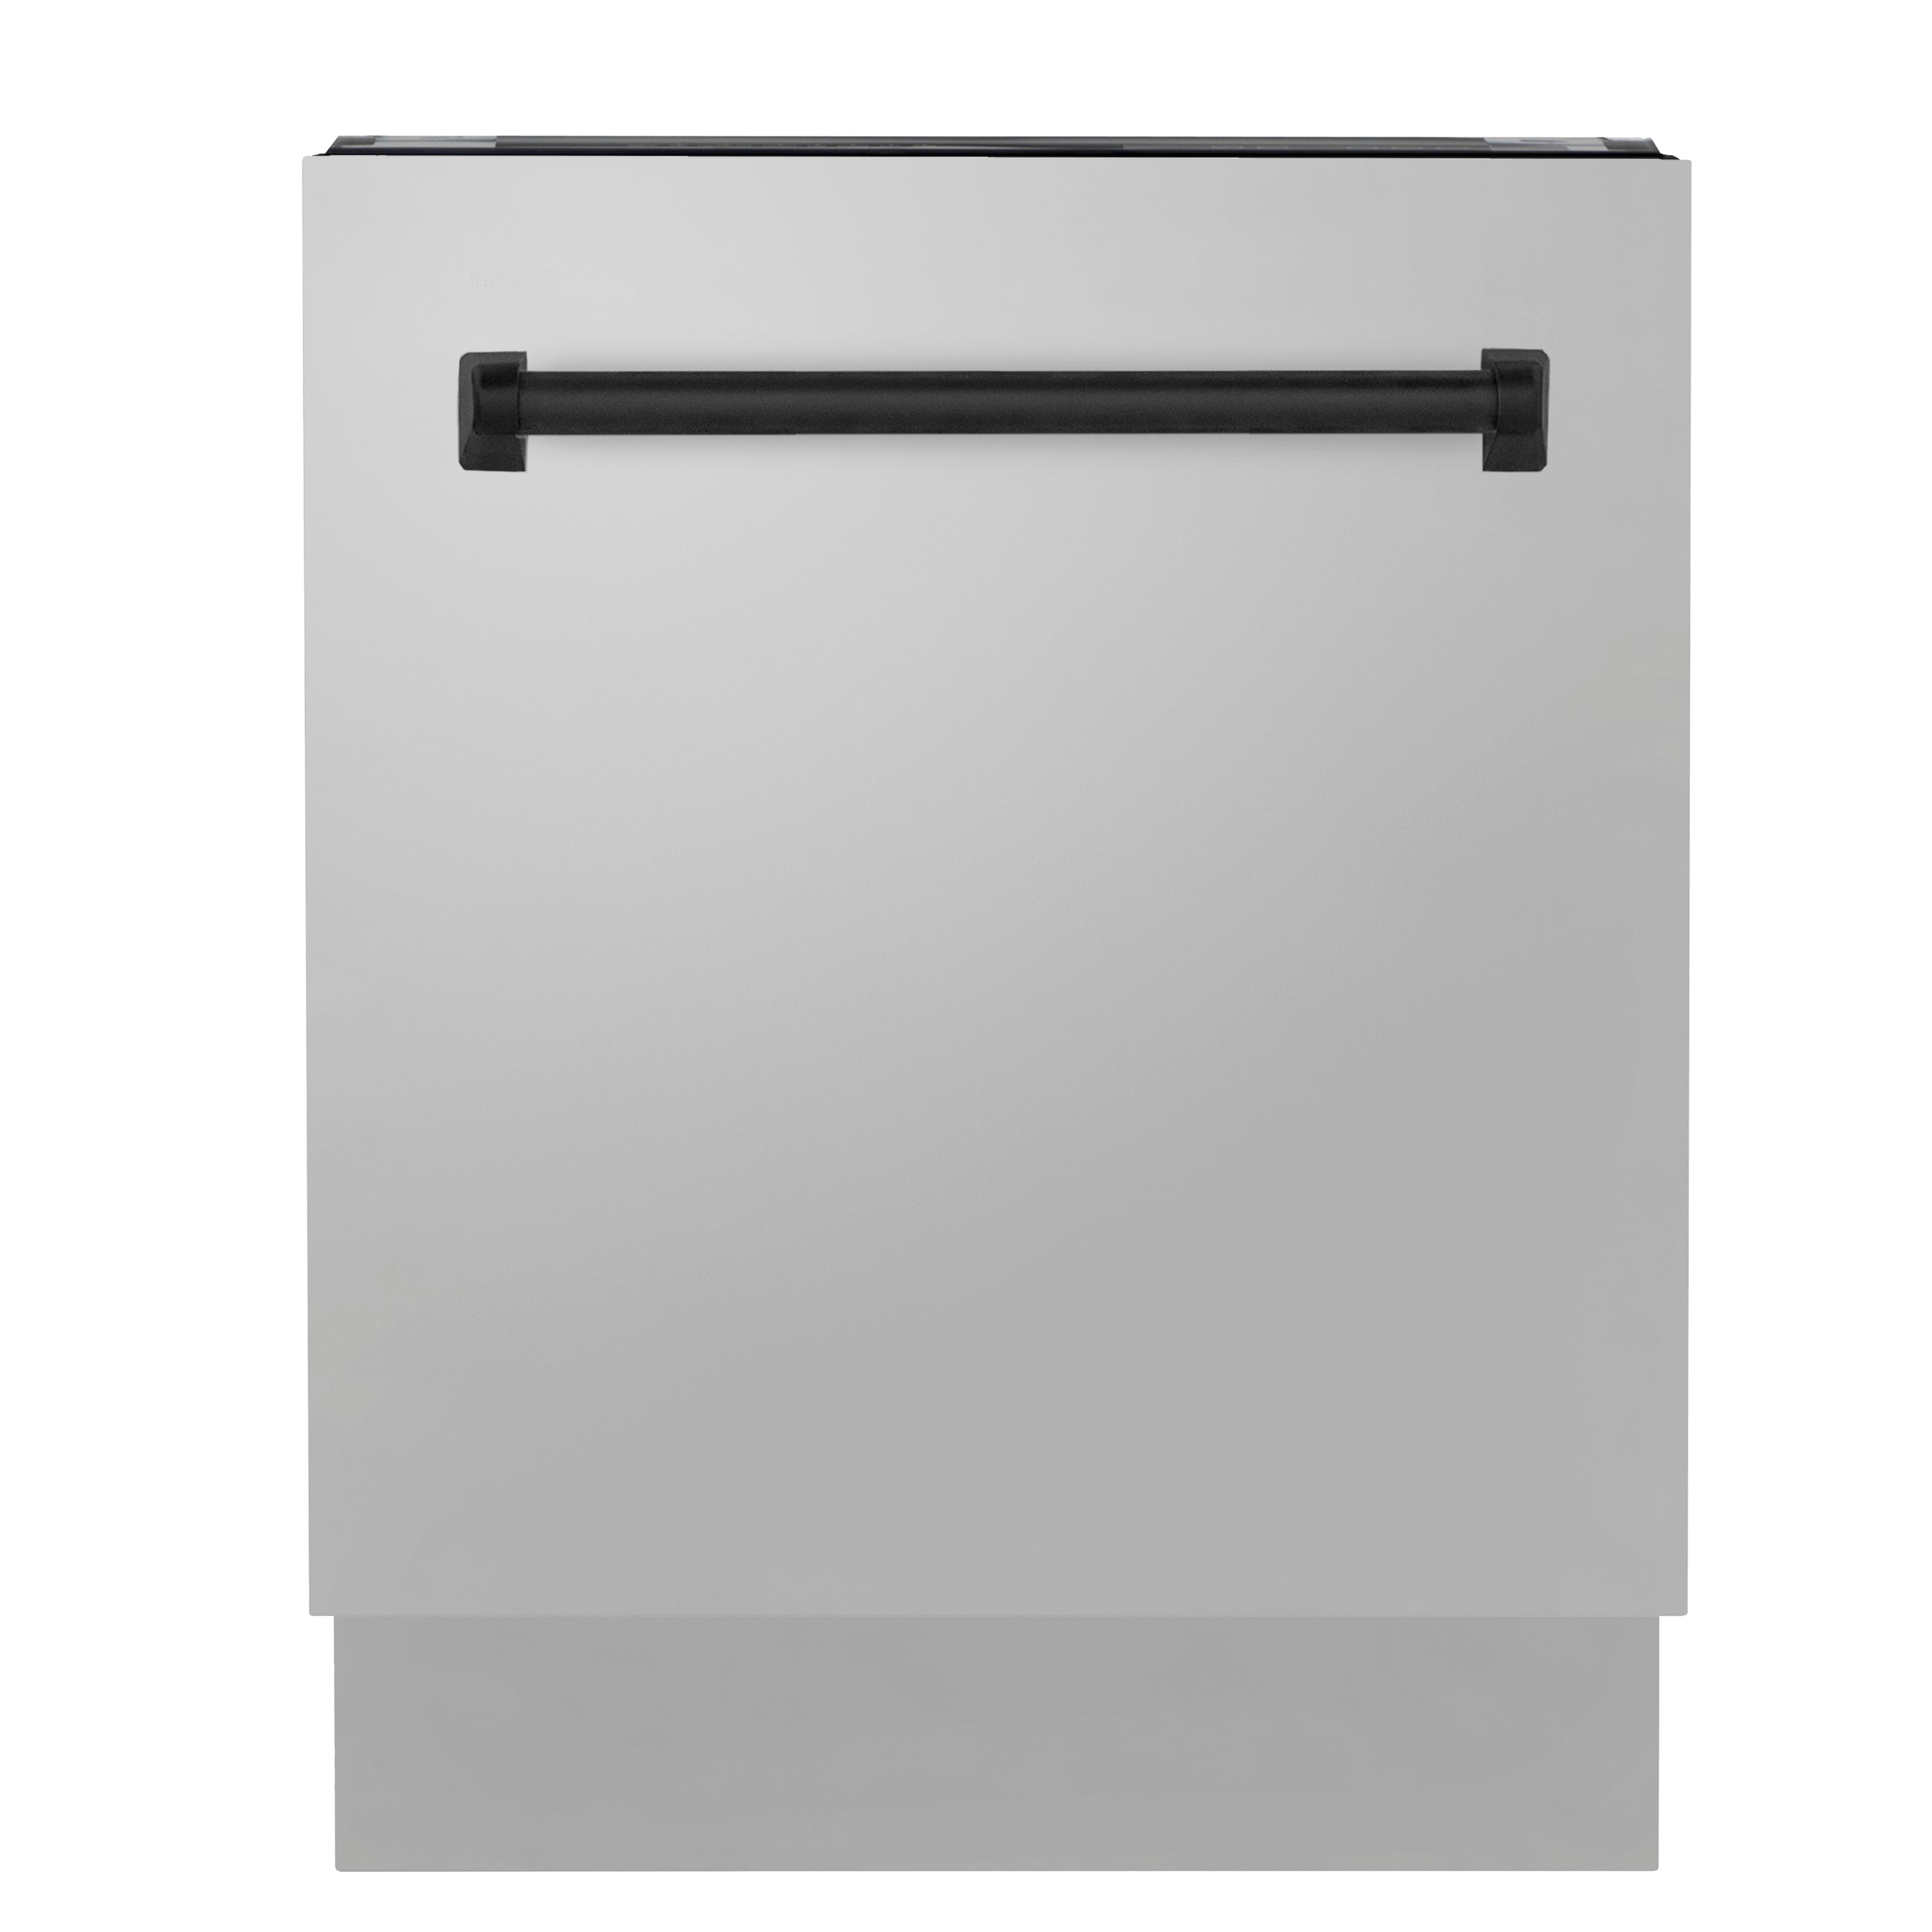 ZLINE Autograph Edition 24" 3rd Rack Top Control Built-In Tall Tub Dishwasher in Stainless Steel with Matte Black Handle, 51dBa (DWVZ-304-24-MB)